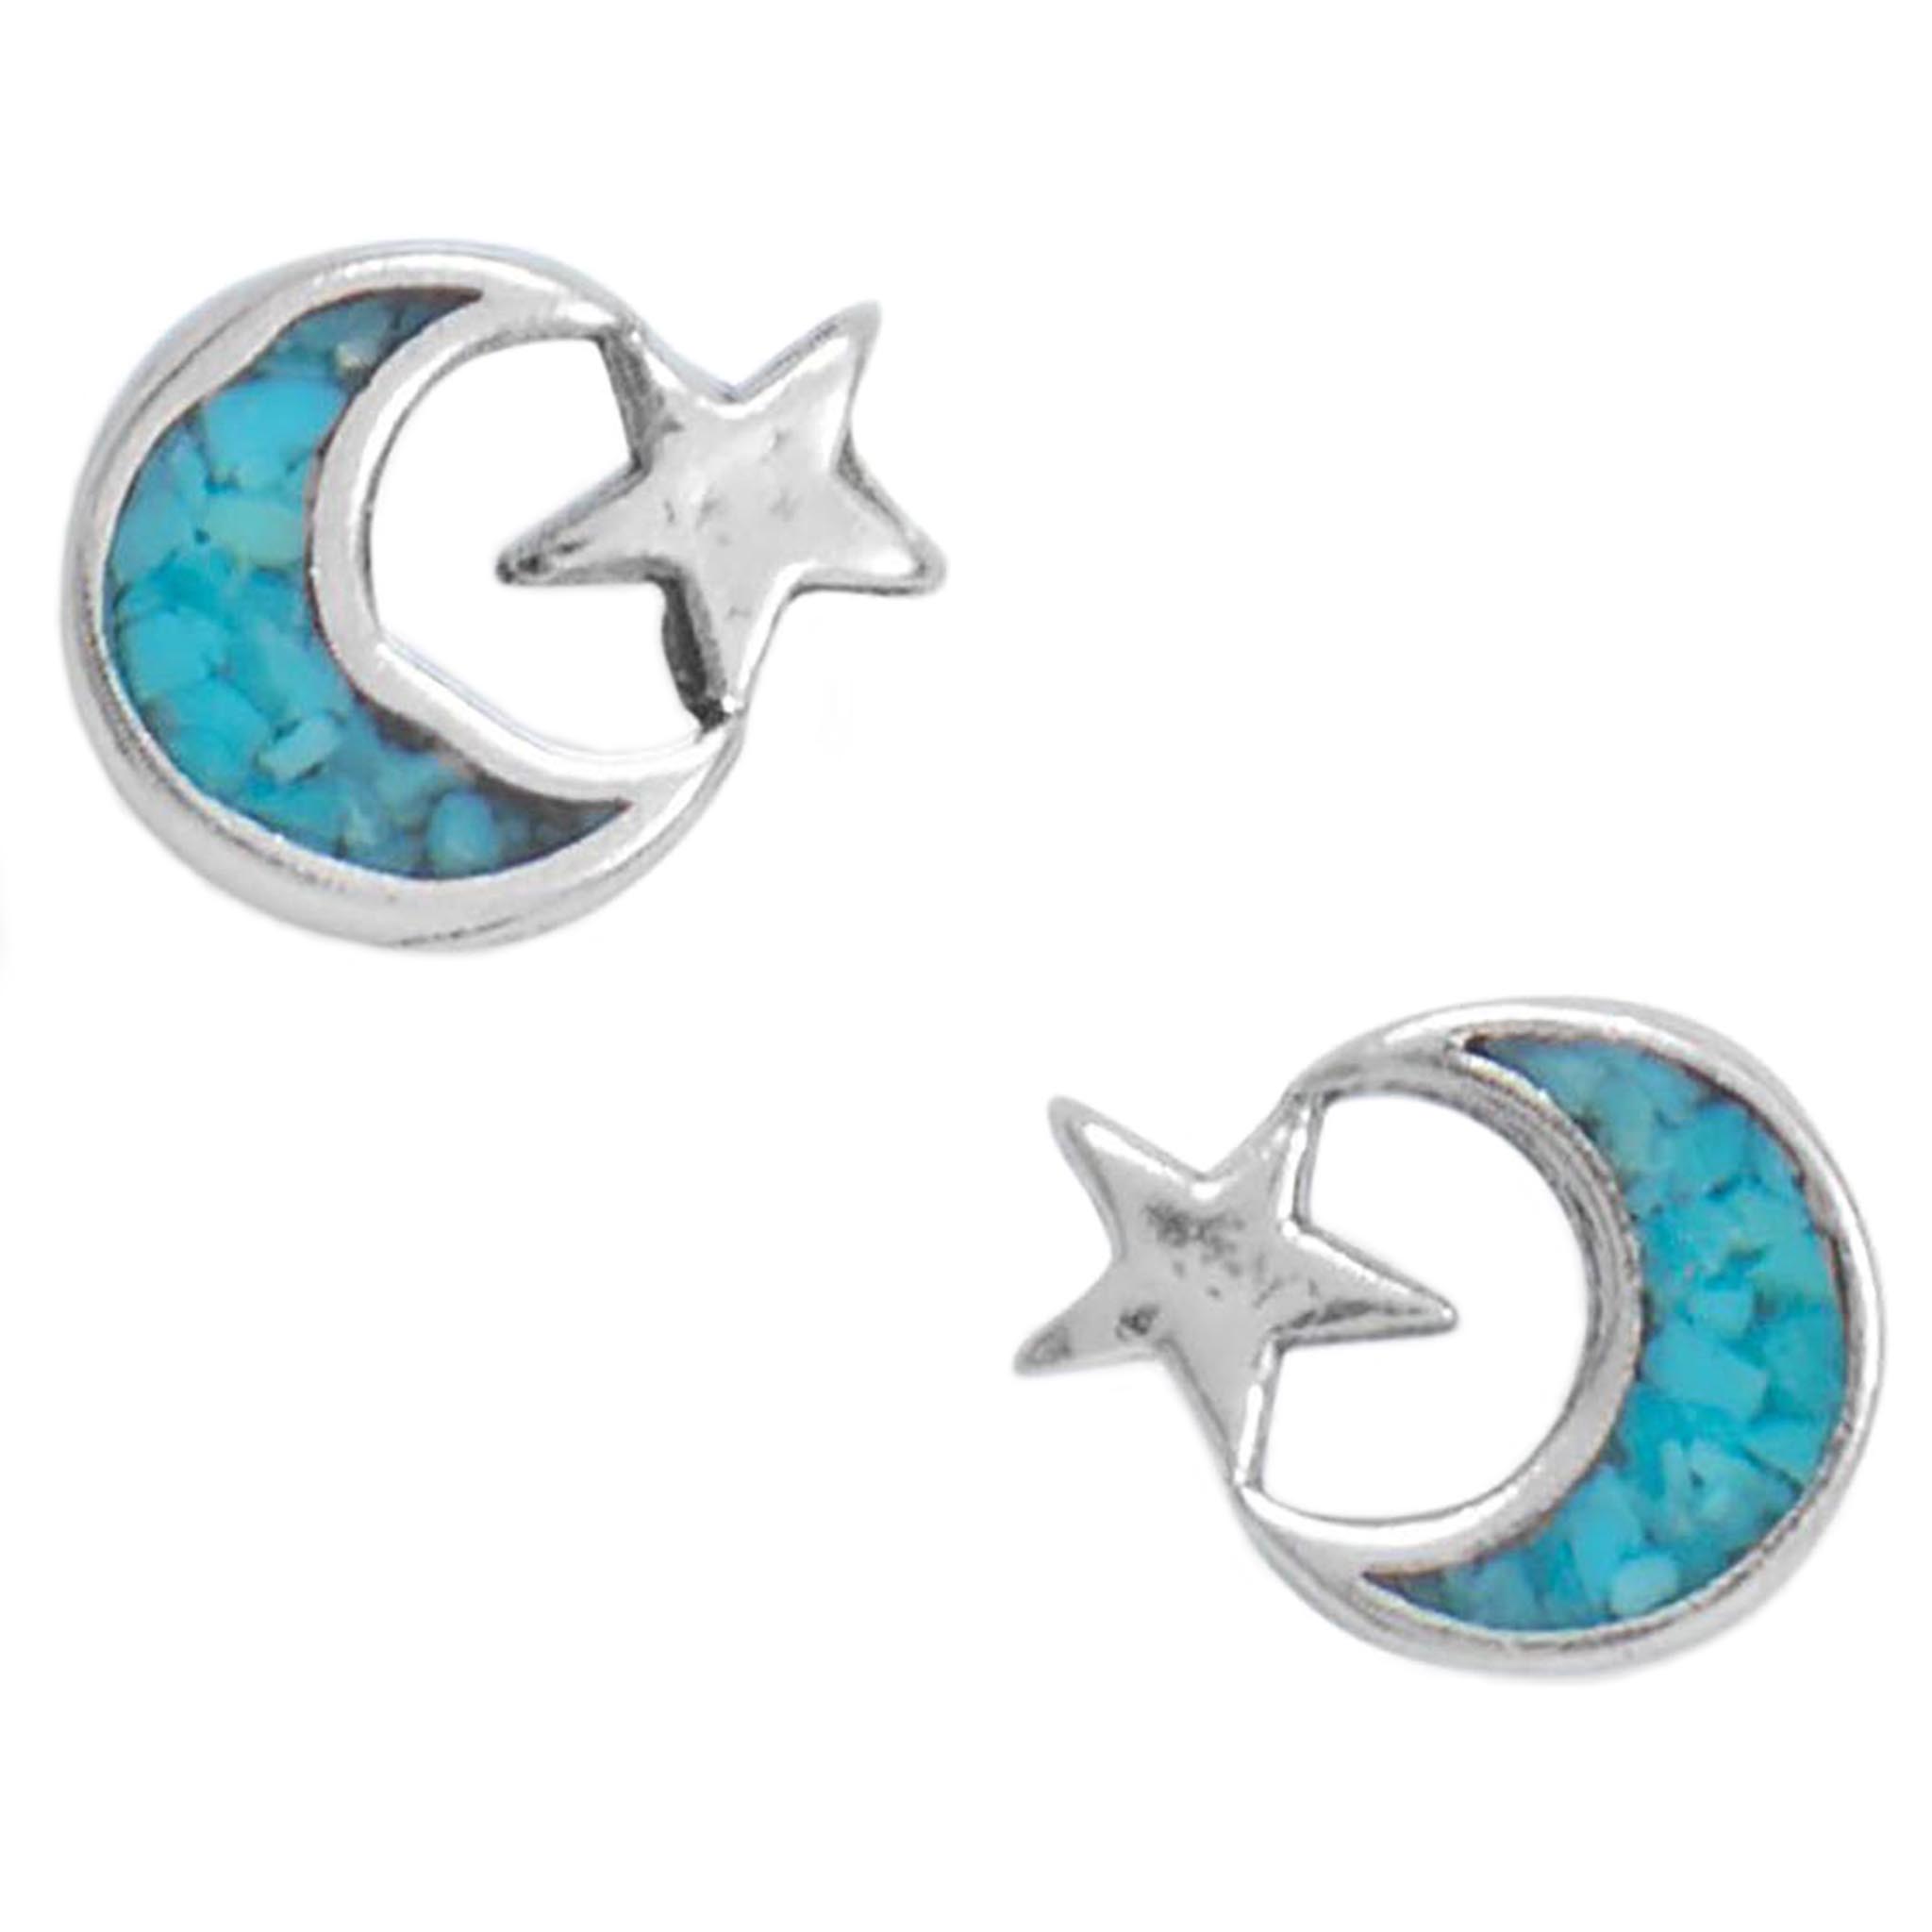 Turquoise Chip Moon and Star Stud Earrings